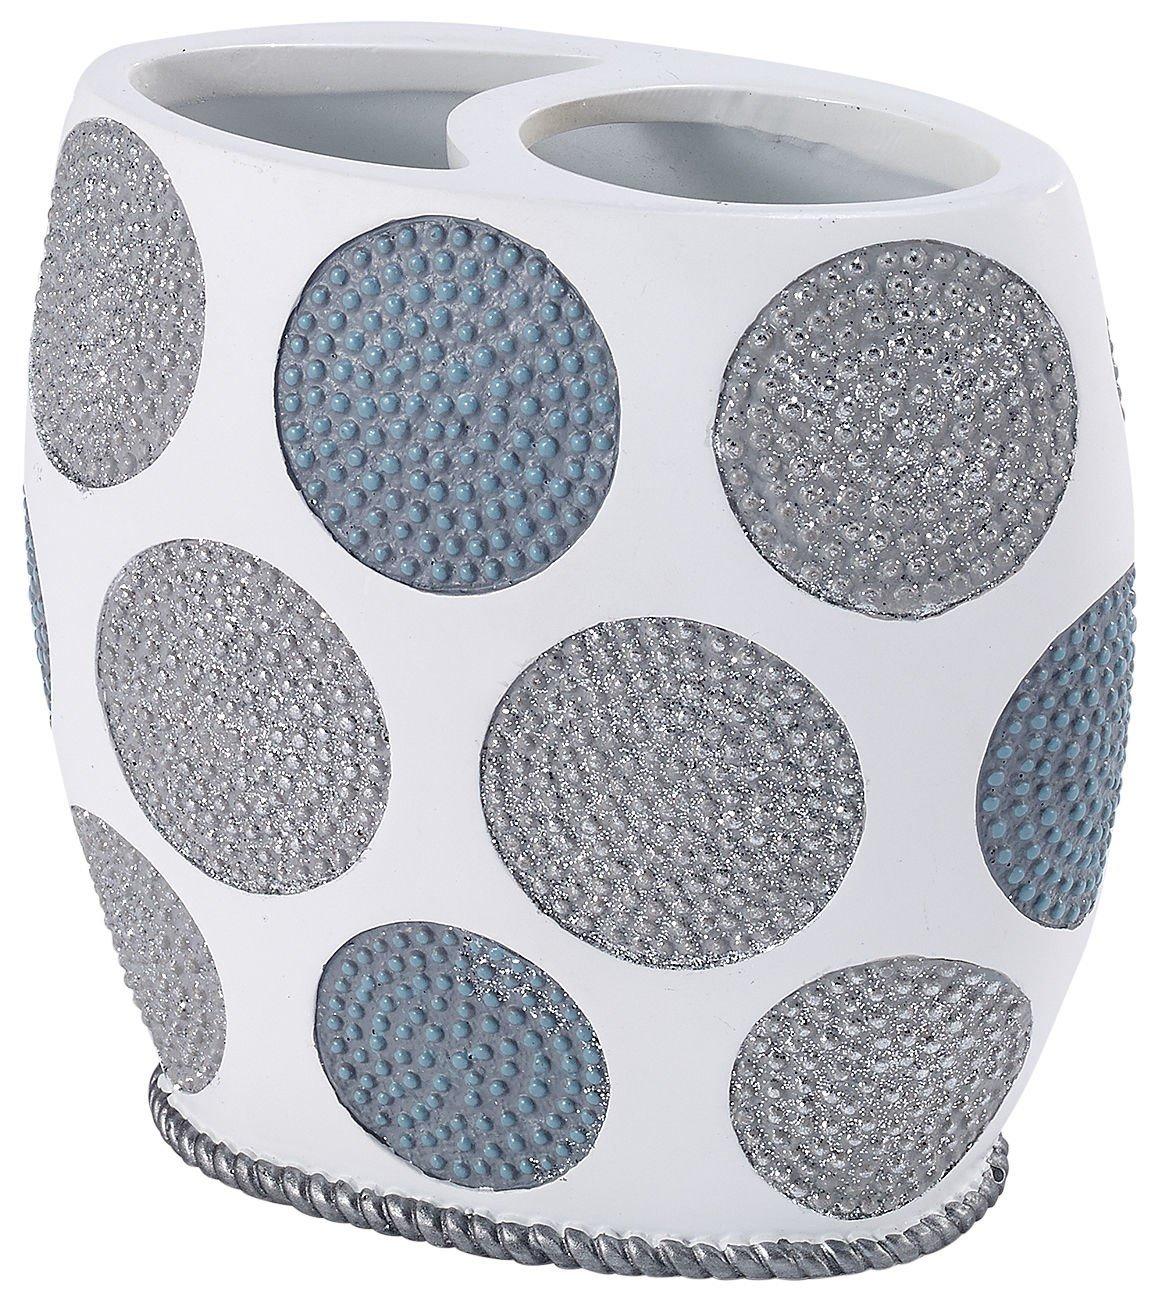 Dotted Circles Toothbrush Holder